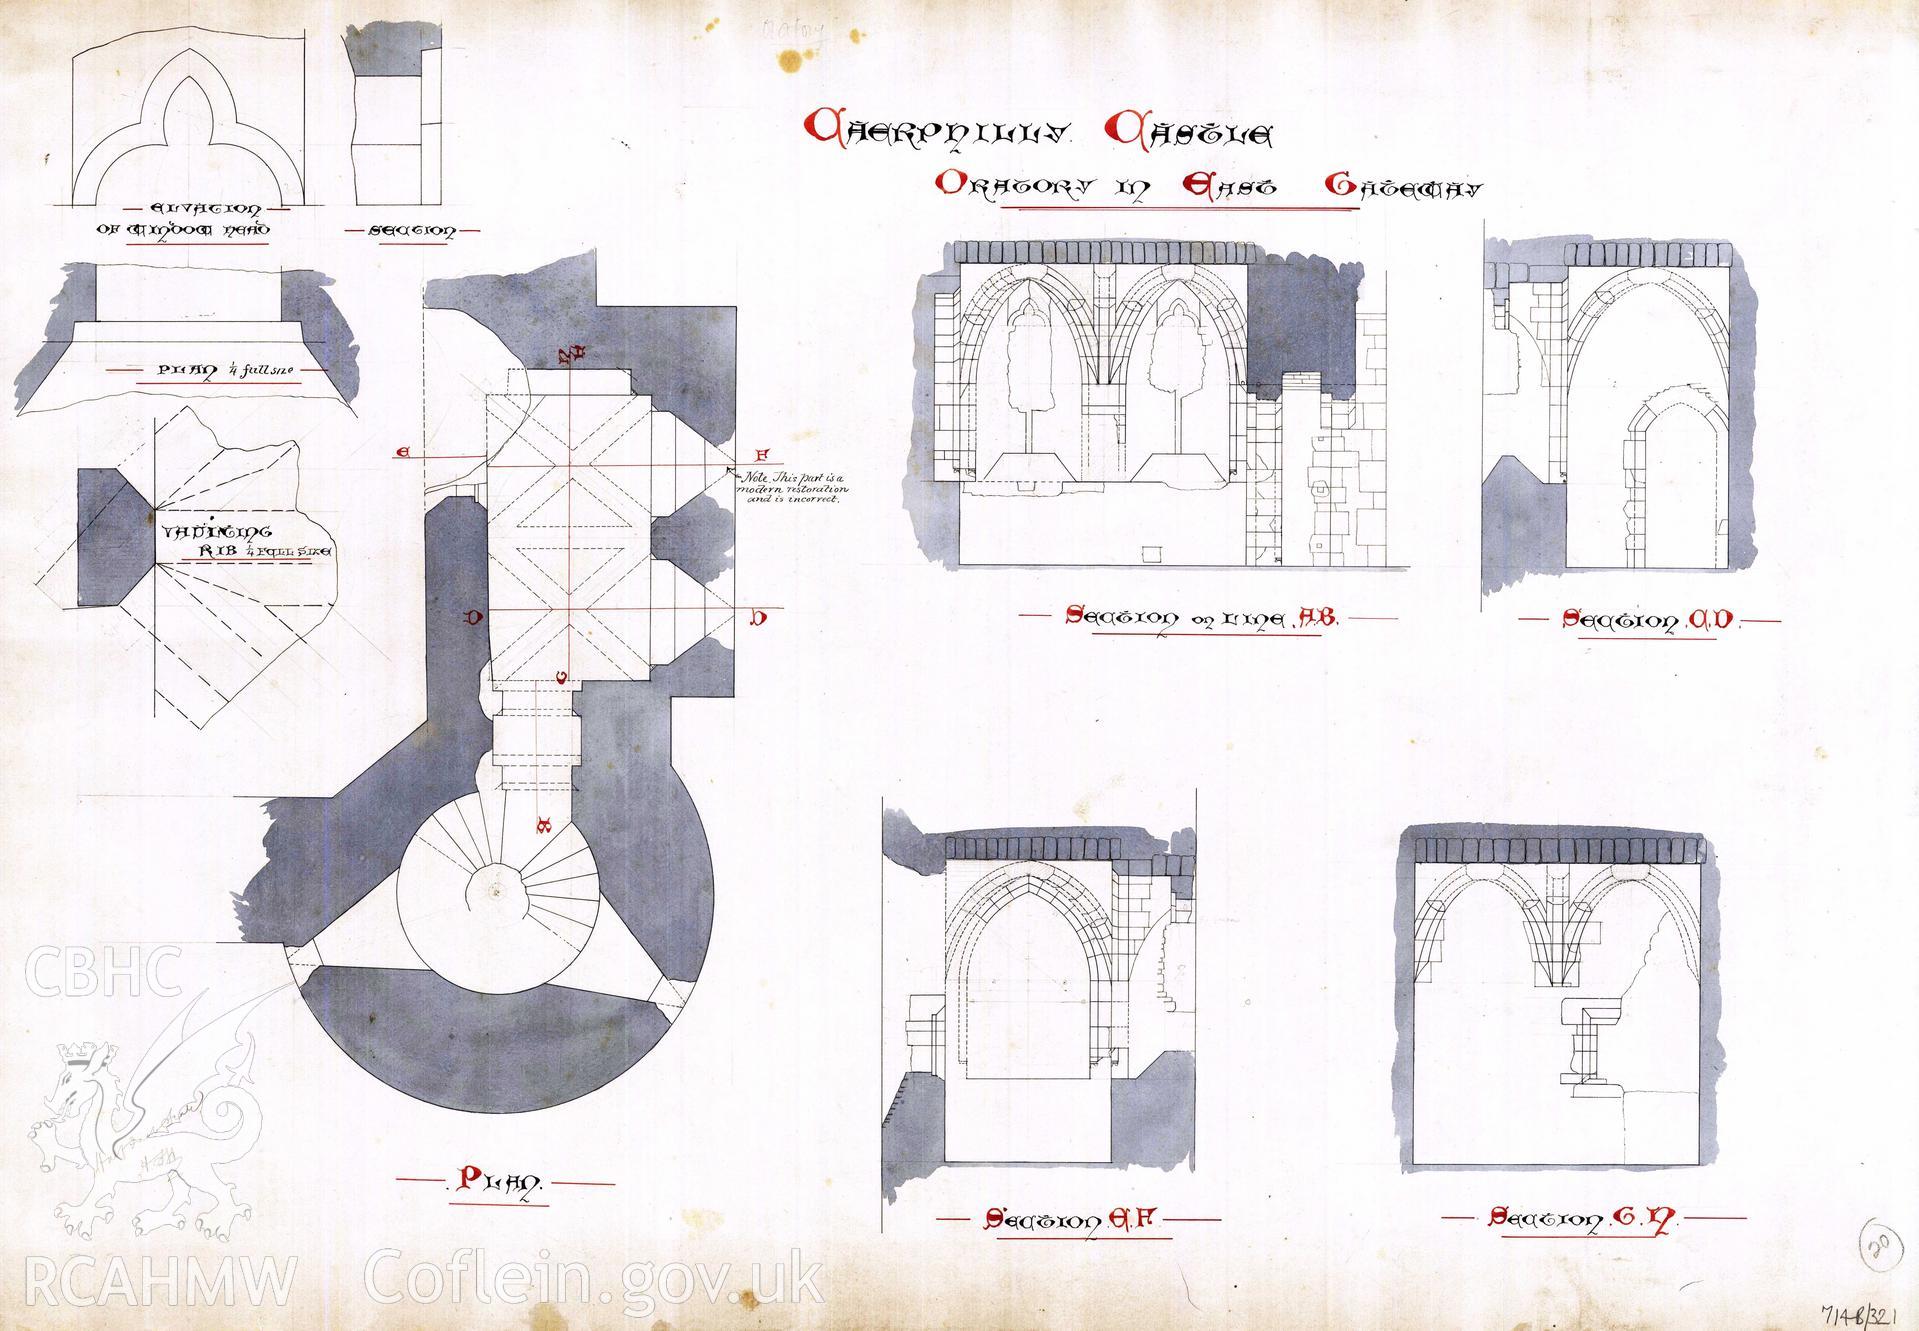 Cadw guardianship monument drawing of Caerphilly Castle. Plans and section of Oratory, East gateway. Cadw Ref. No. 714B/321. No scale.